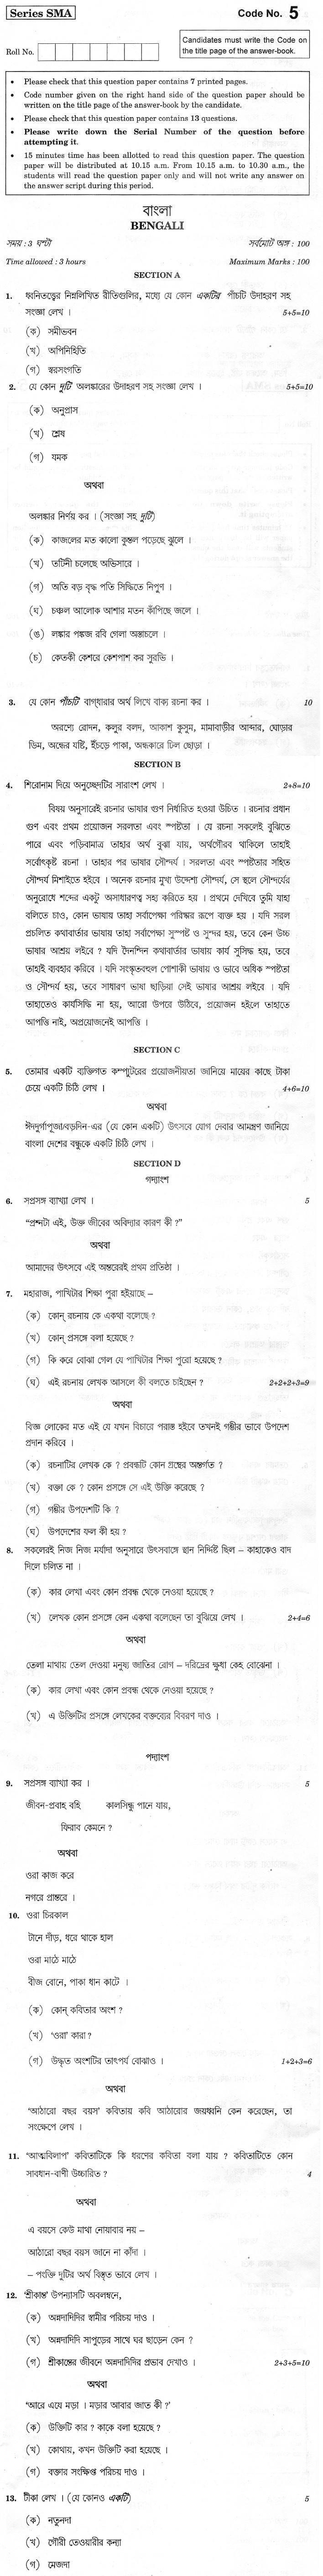 CBSE Class XII Previous Year Question Paper 2012 Bengali